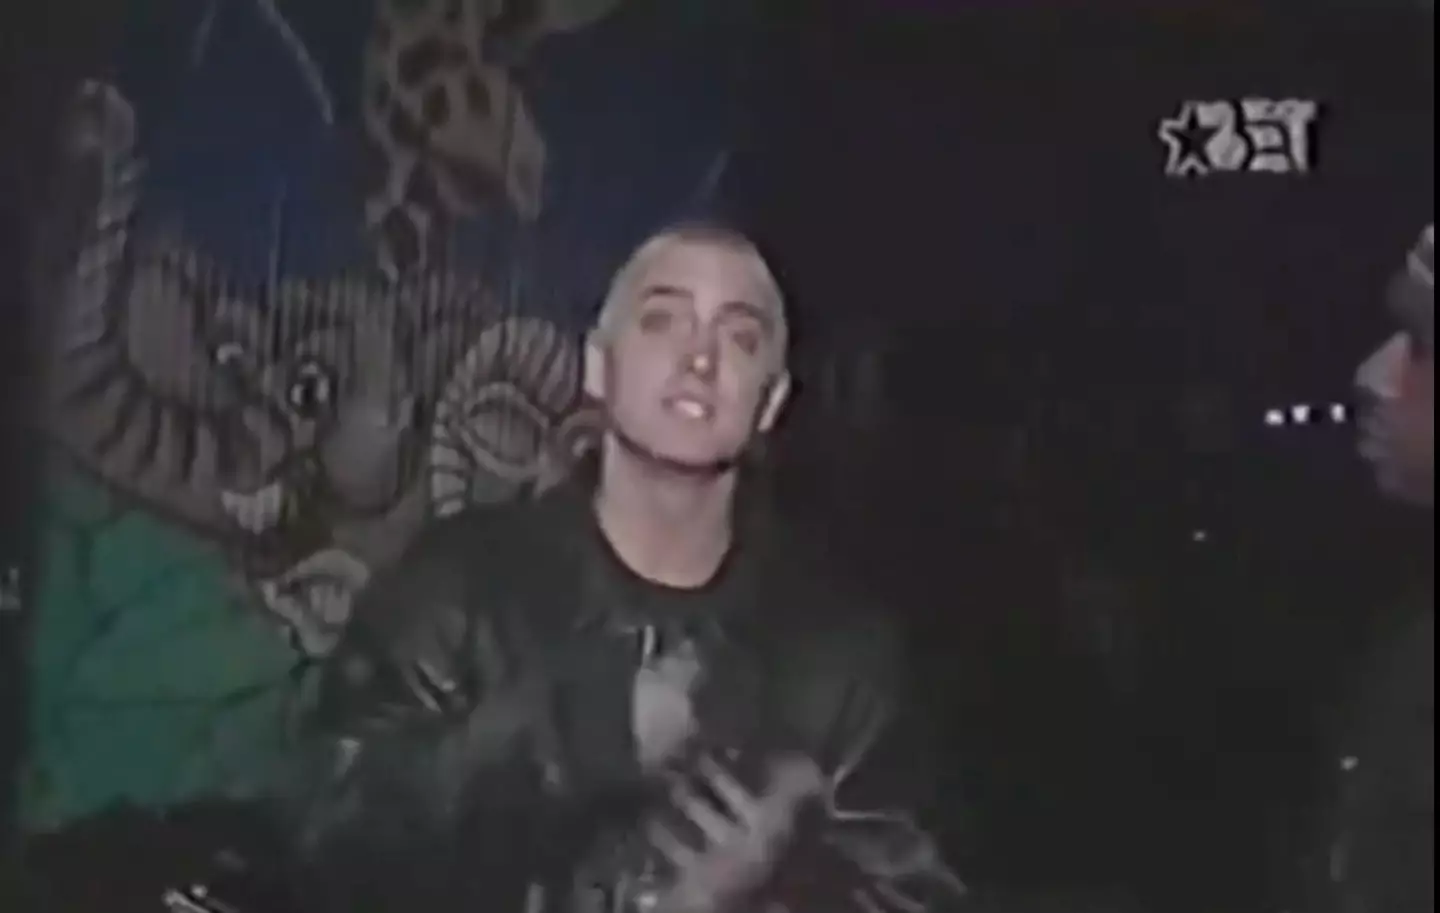 A interview with Rap City in 1999 has resurfaced online.